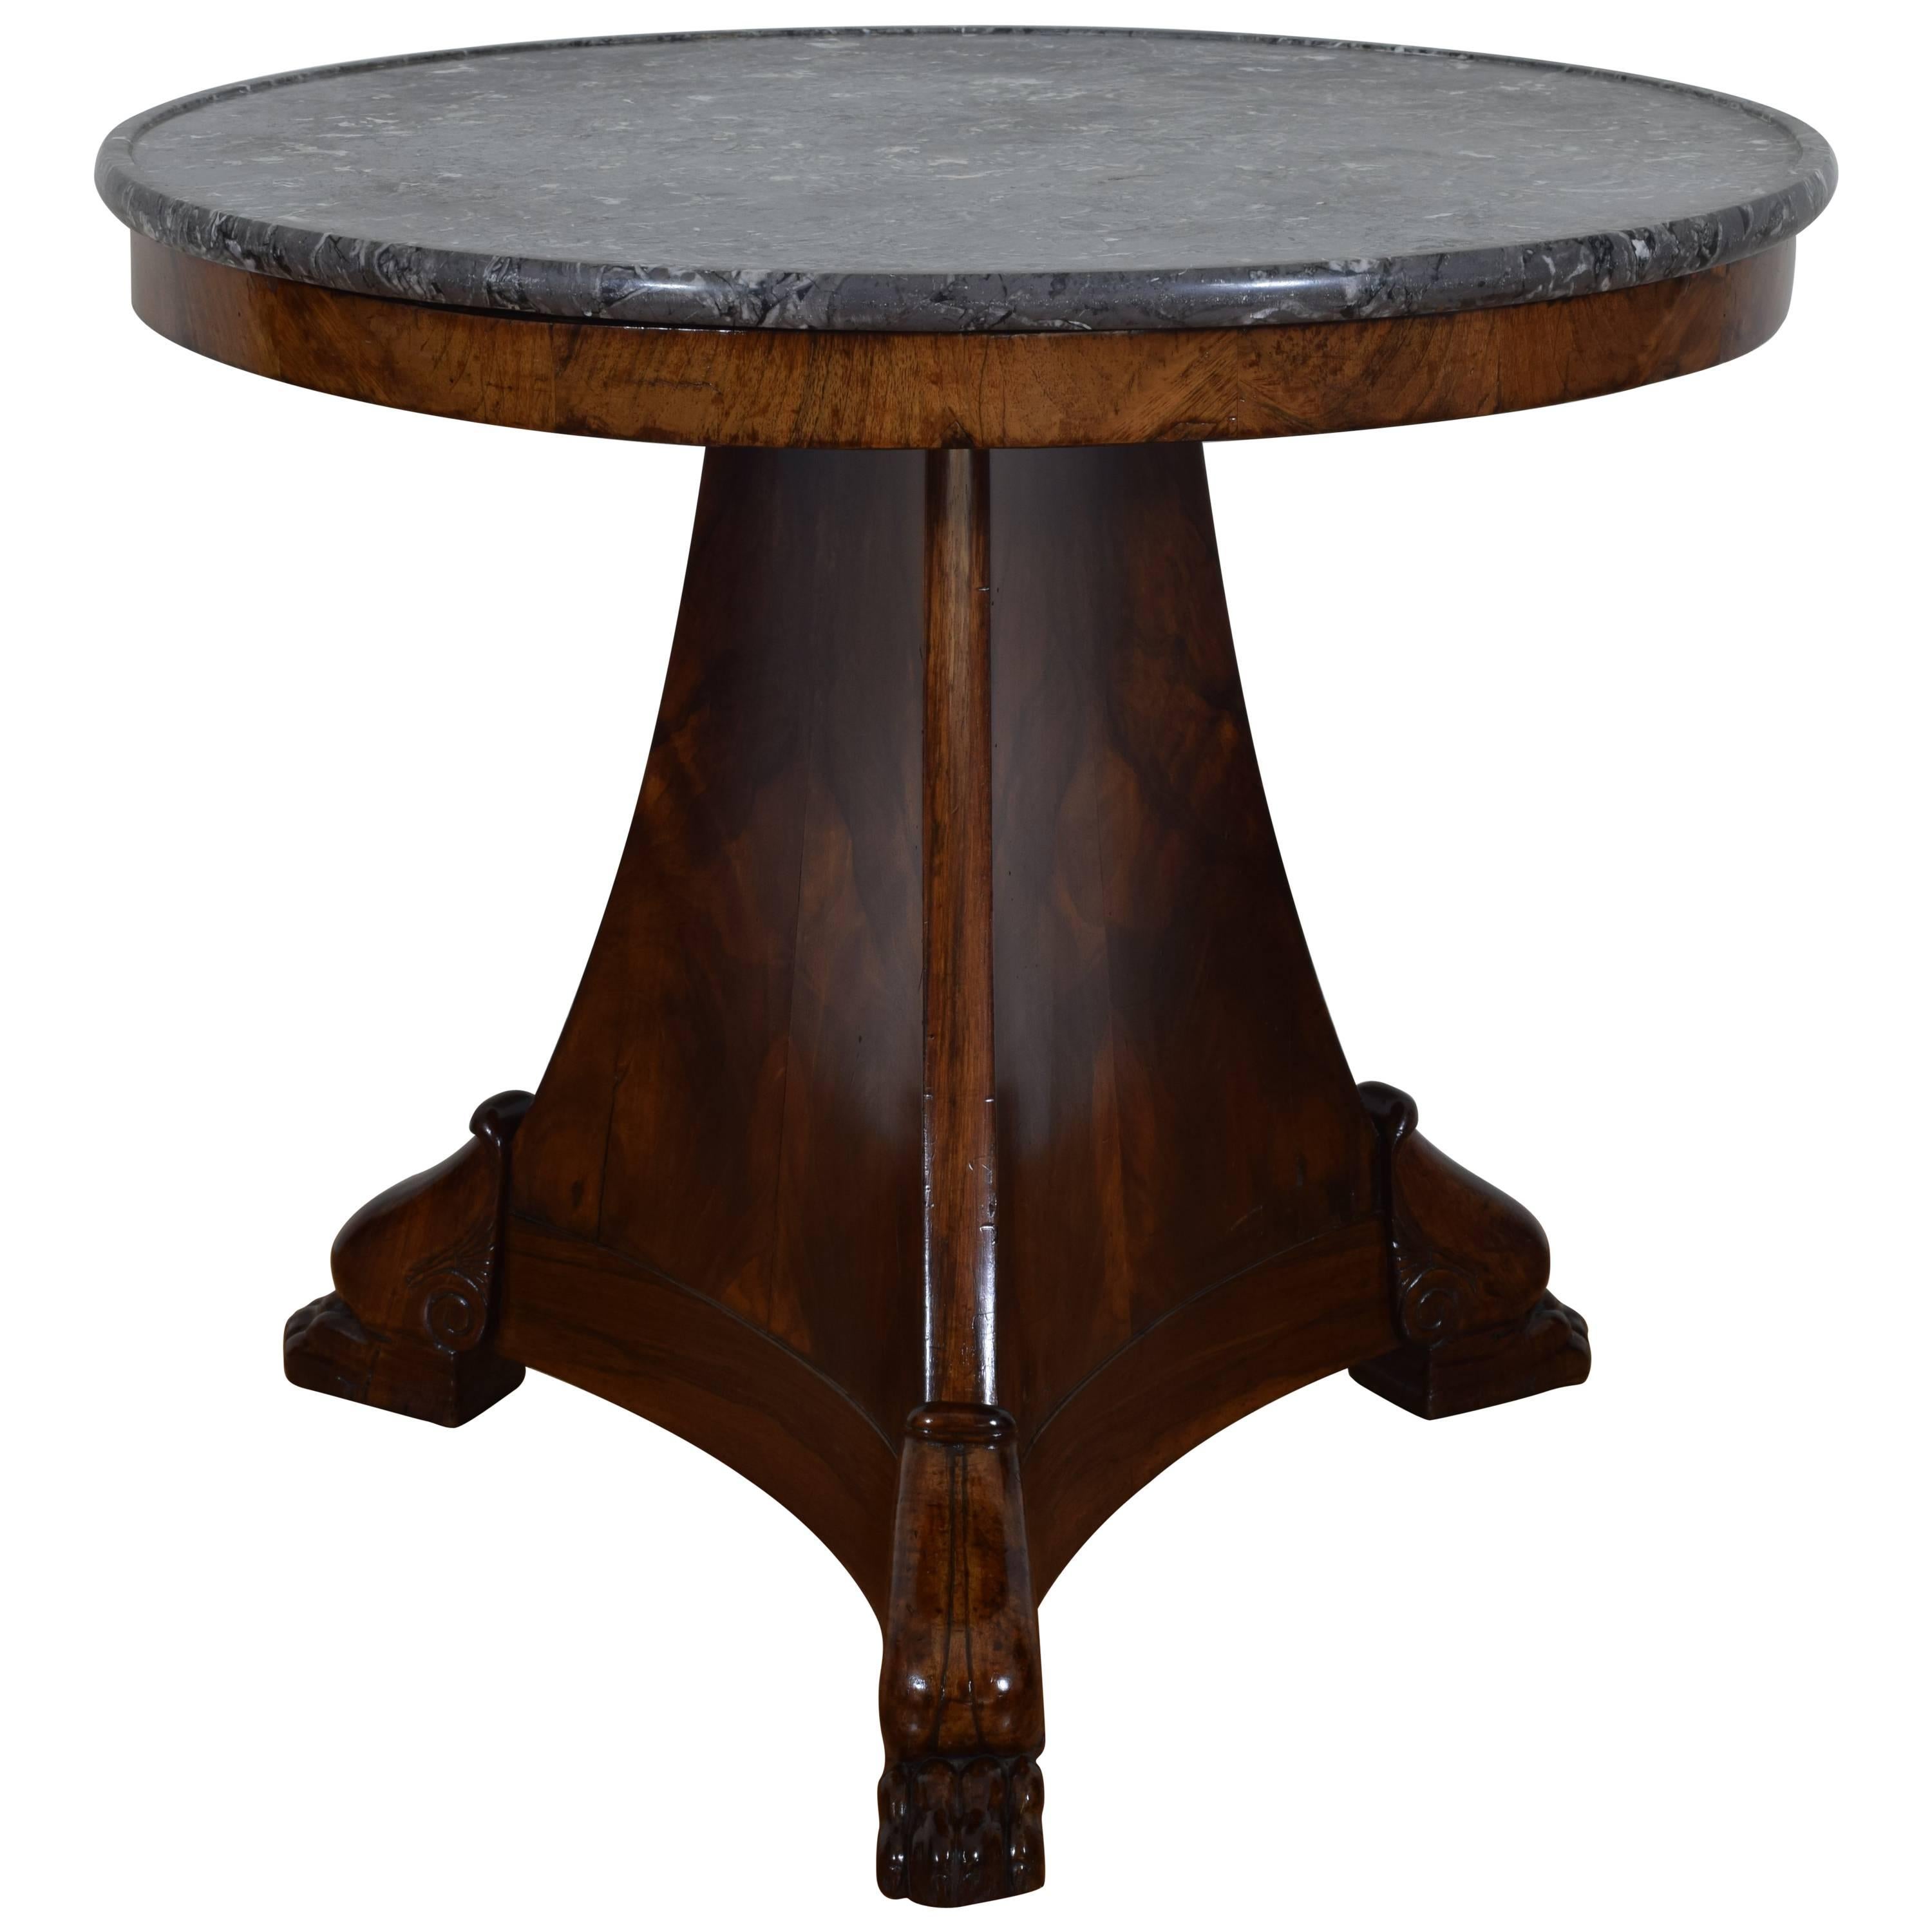 French Restauration Period Walnut and Marble-Top Center Table, circa 1825